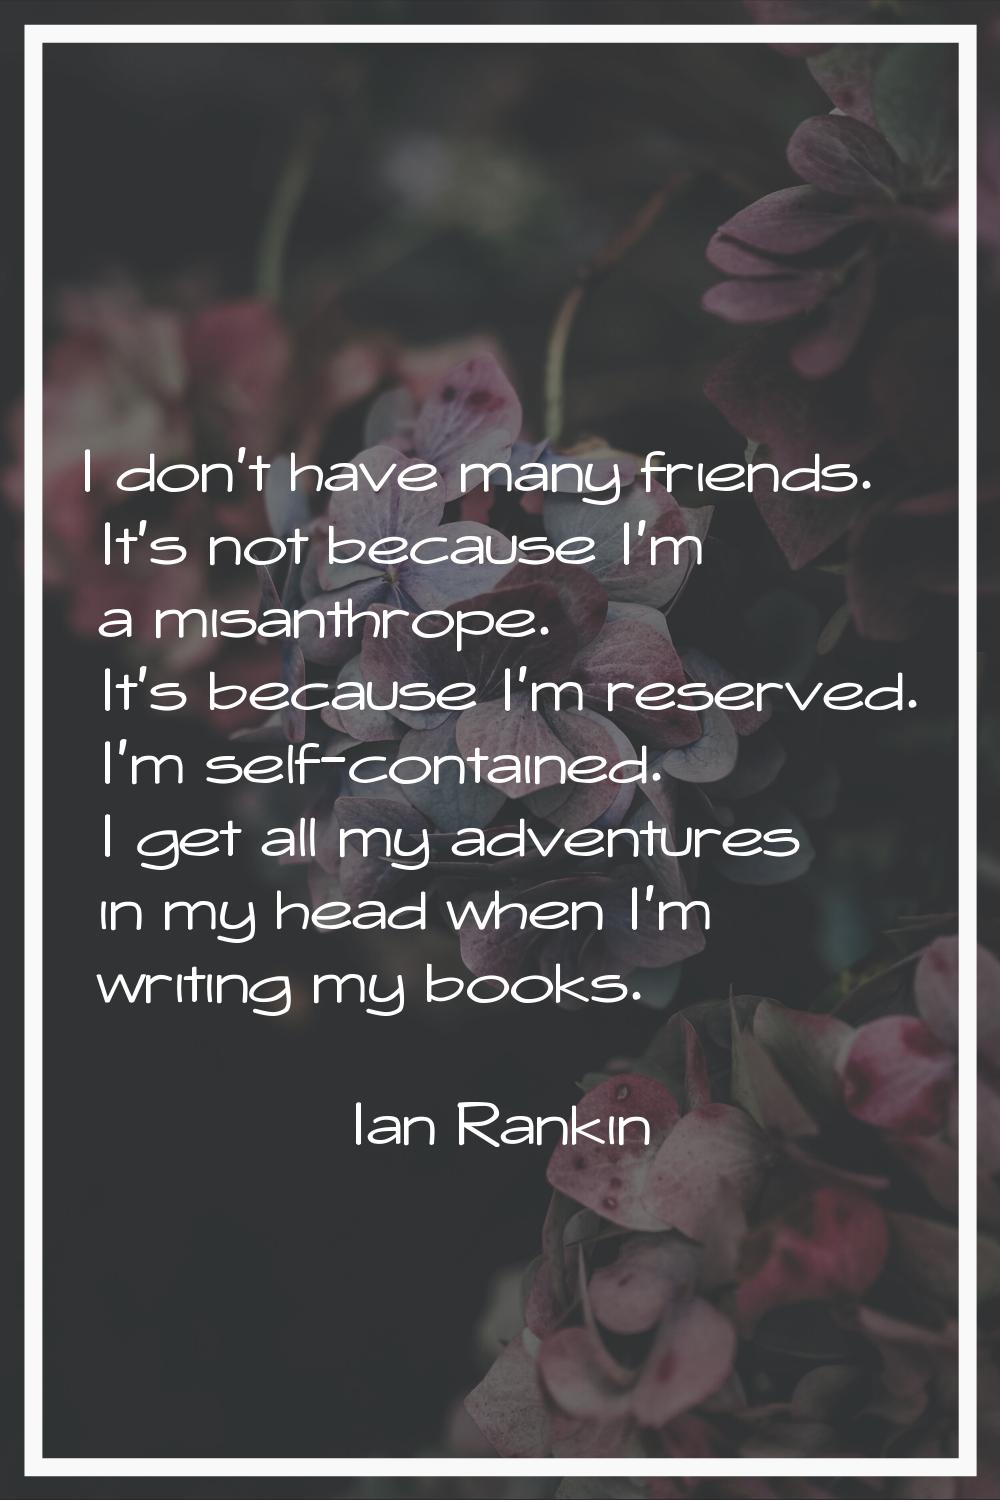 I don't have many friends. It's not because I'm a misanthrope. It's because I'm reserved. I'm self-